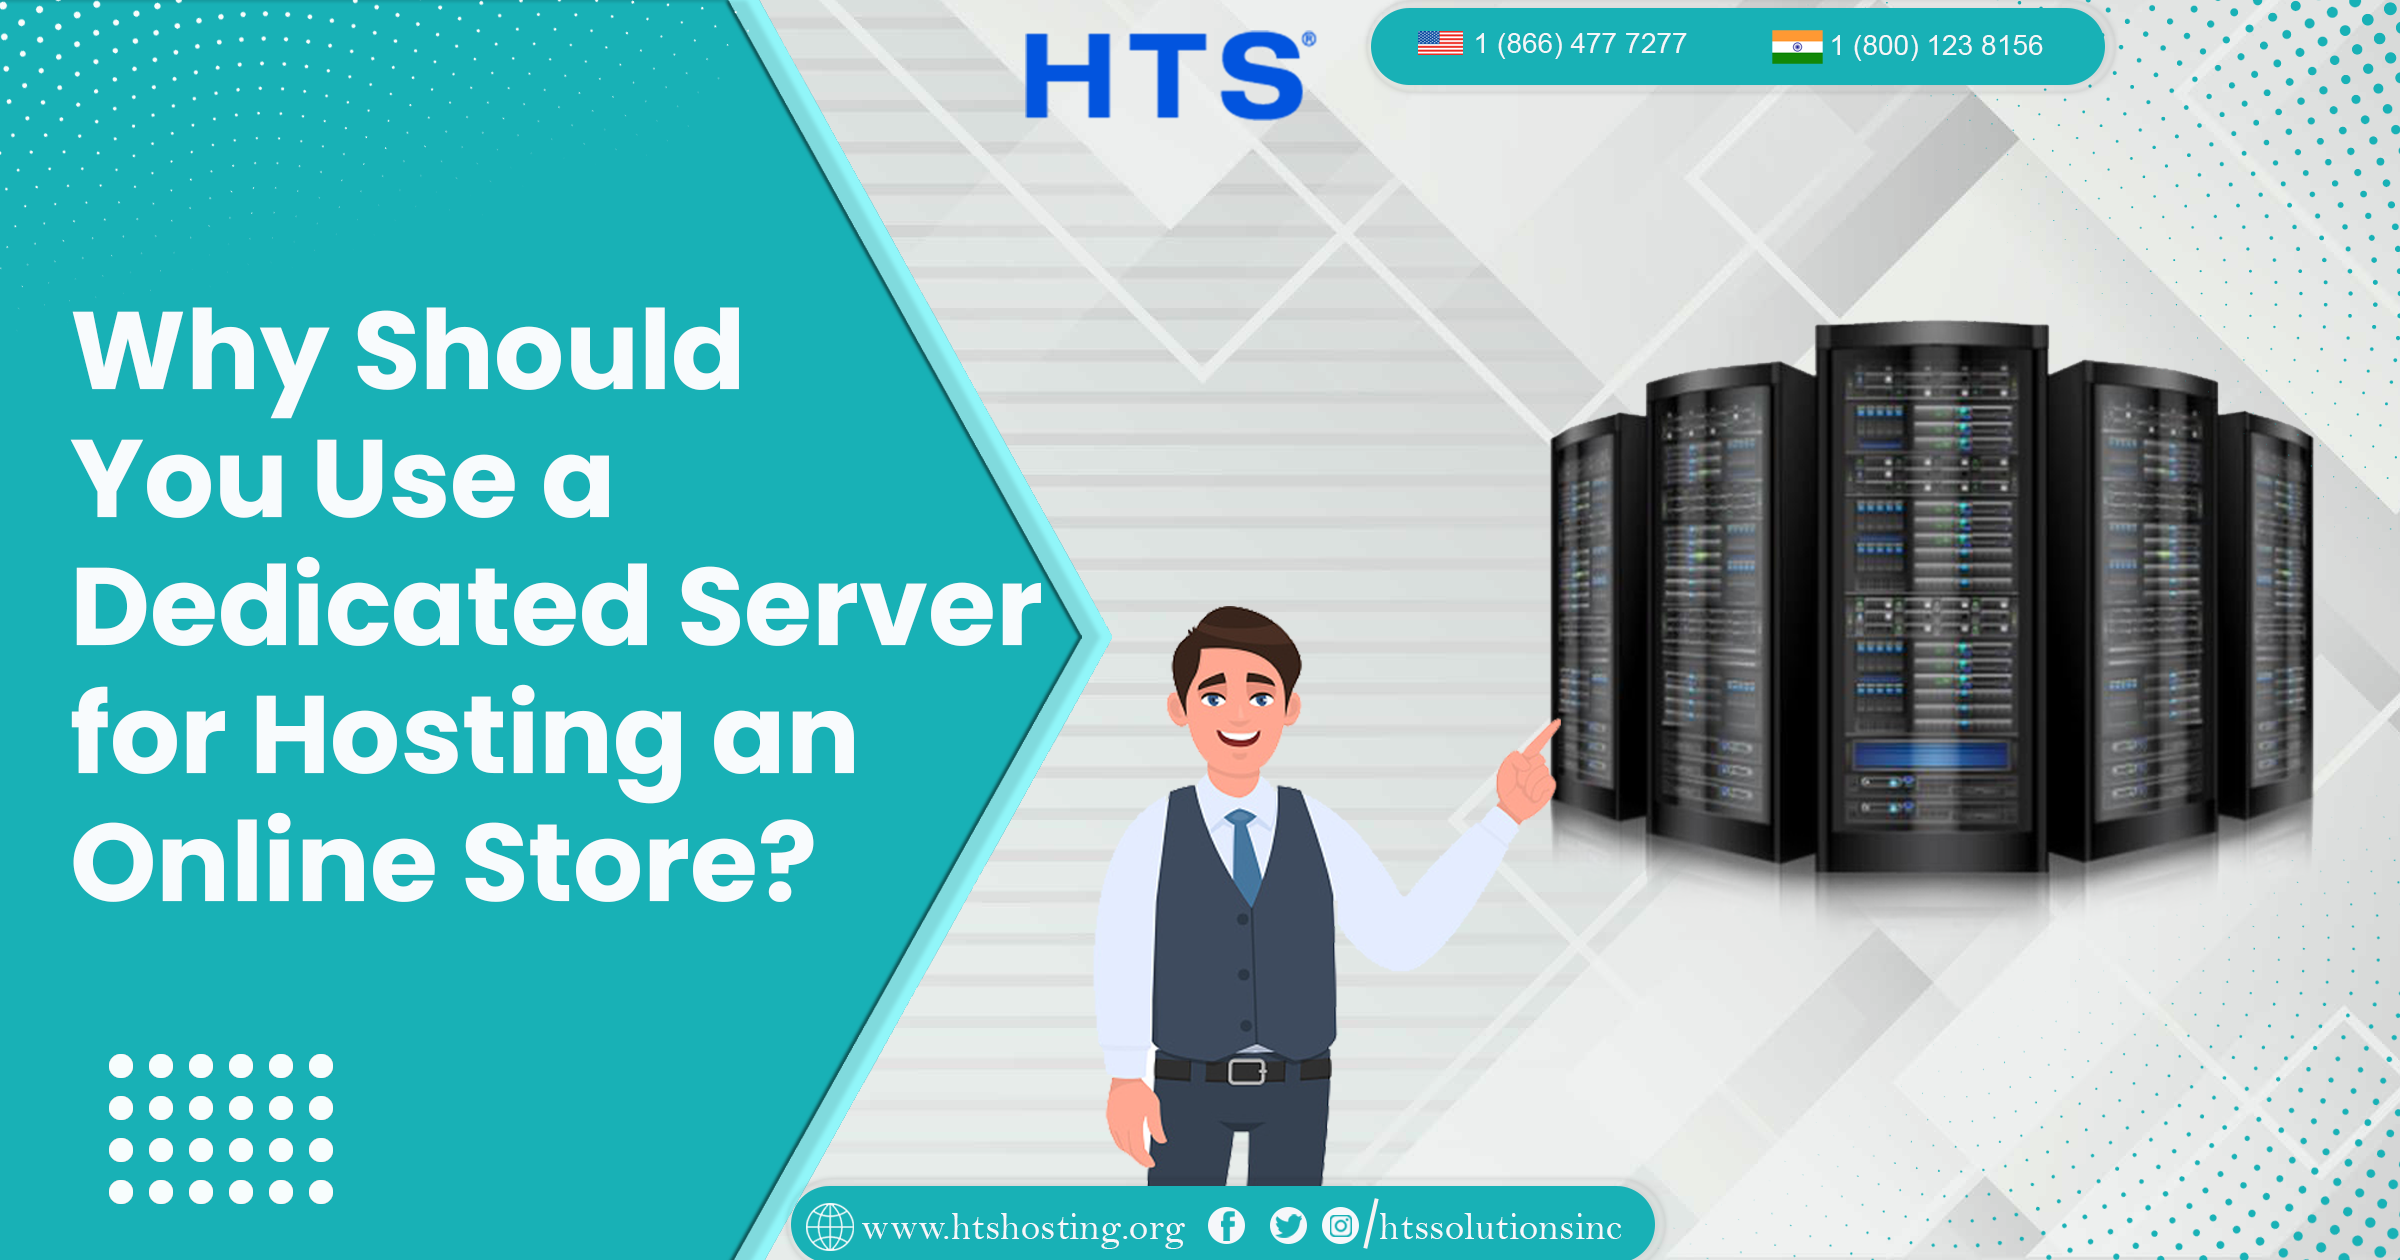 Why Should You Use a Dedicated Server for Hosting an Online Store?